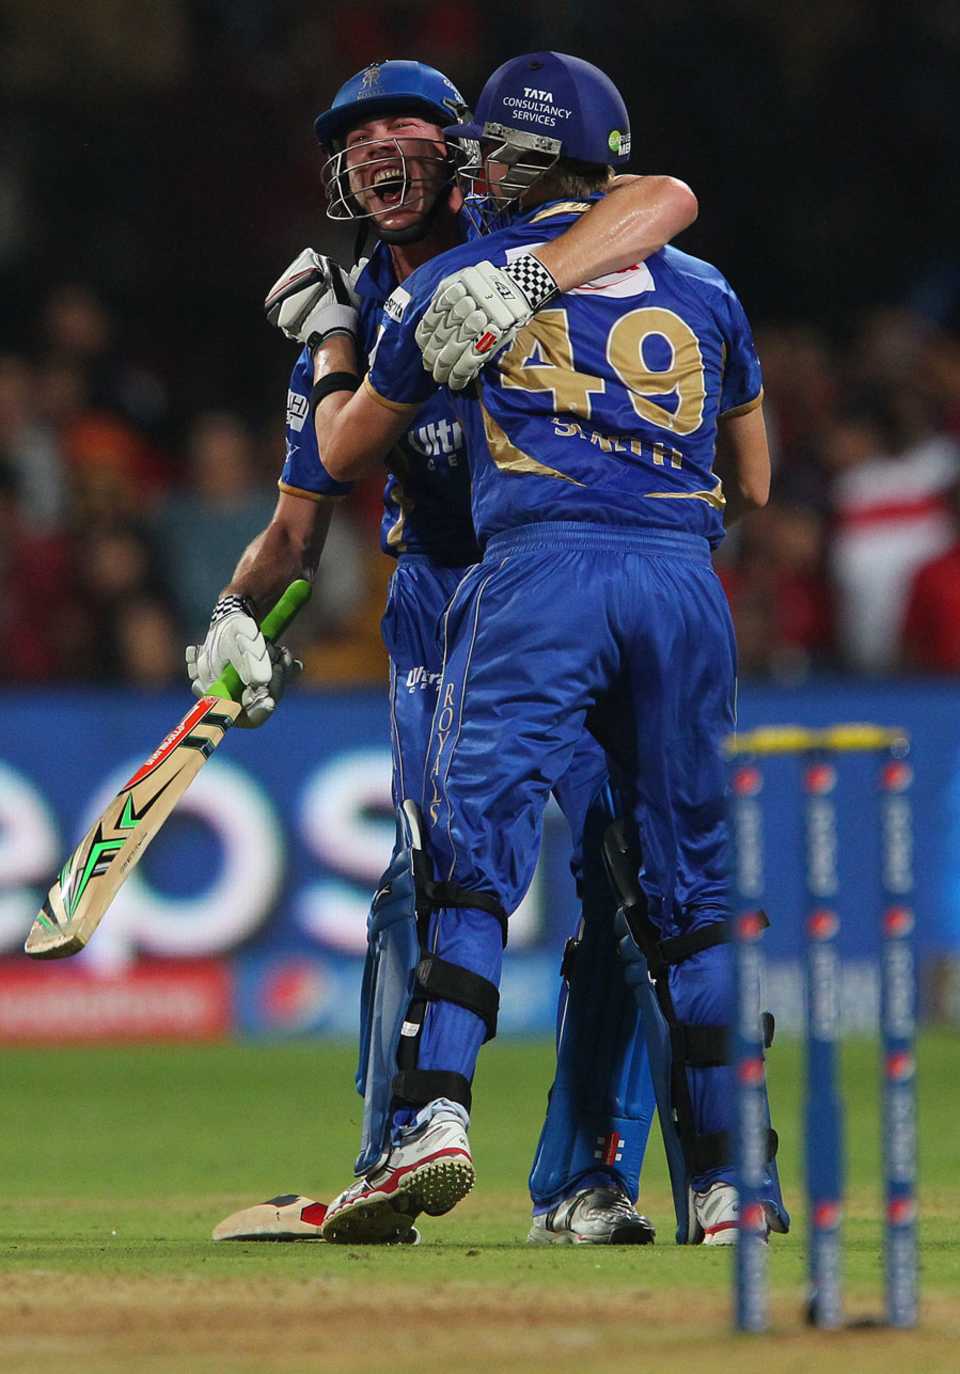 Steven Smith and James Faulkner embrace after Rajasthan Royals' stunning win, Royal Challengers Bangalore v Rajasthan Royals, IPL 2014, Bangalore, May 11, 2014